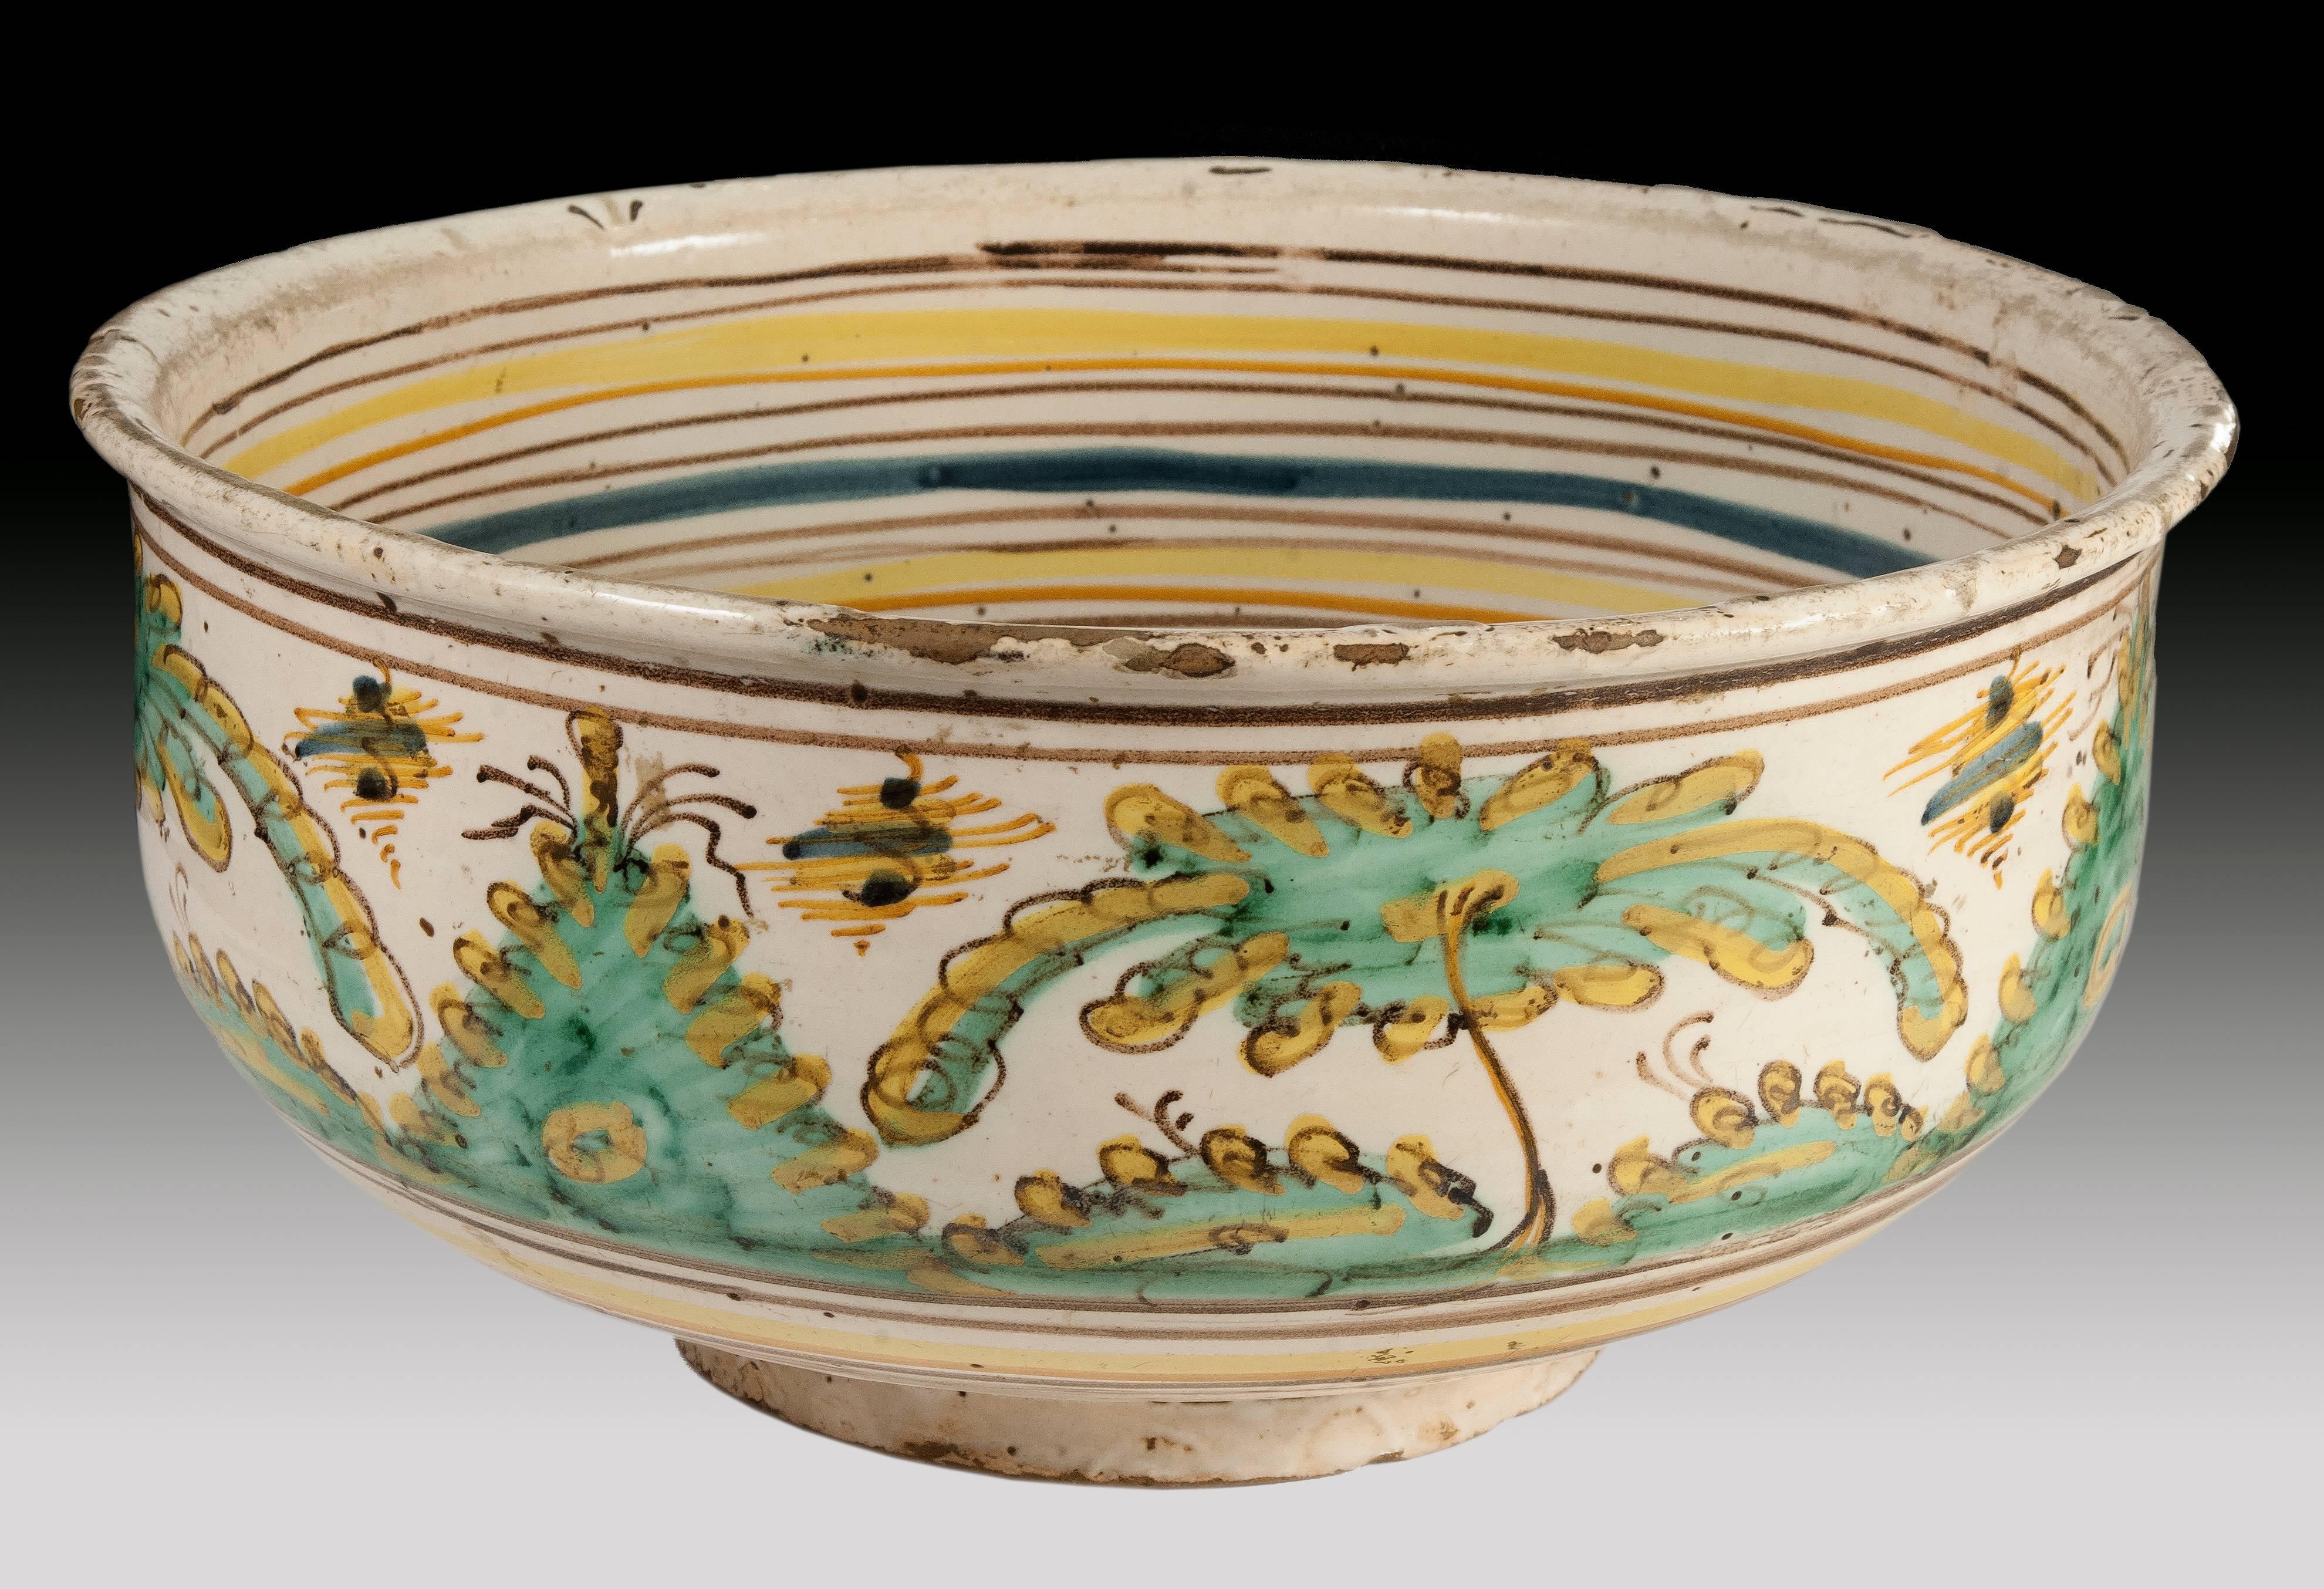 Ceramic bowl decorated with high-temperature enamels on a white opaque tin slip. The polychrome is based on colors typical of Talavera: cobalt blue, copper green, manganese black, antimony yellow and ocher, browns and iron oranges. These glazes were